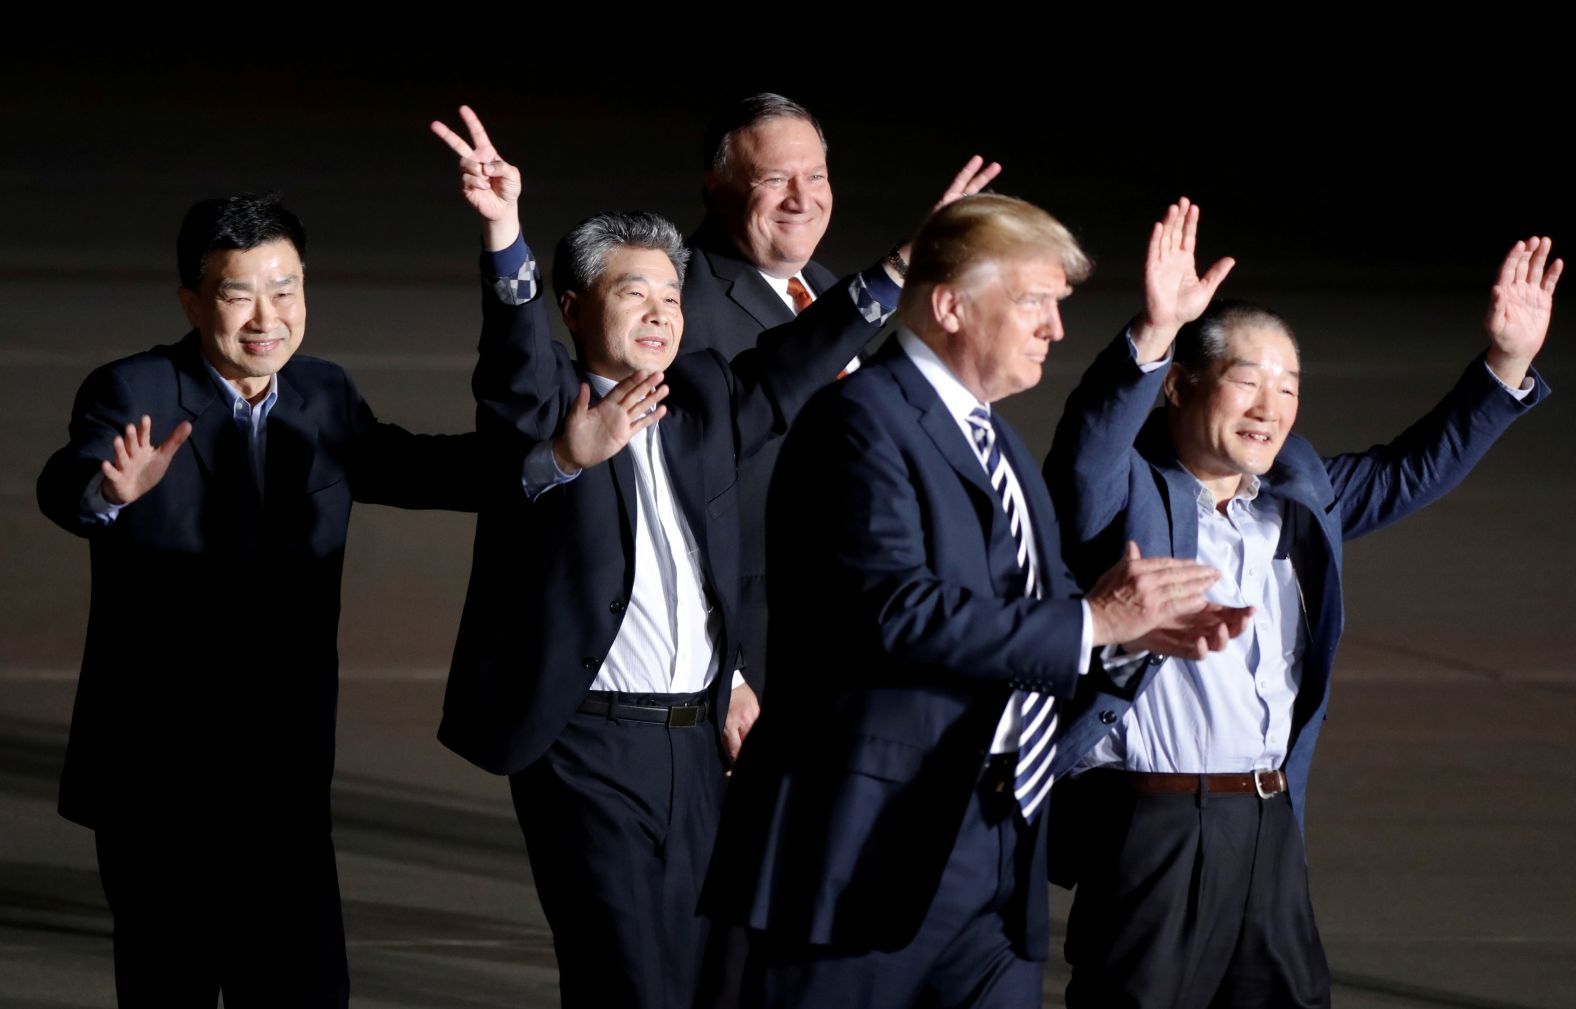 Three Americans <a href="https://www.cnn.com/2018/05/10/politics/trump-north-korea-freed-americans/index.html" target="_blank">released by North Korea</a> are welcomed at Andrews Air Force Base in Maryland by President Trump and Secretary of State Mike Pompeo on May 10. Kim Dong Chul, Kim Hak-song and Kim Sang Duk, also known as Tony Kim, were freed while Pompeo was visiting North Korea to discuss Trump's upcoming summit with North Korean leader Kim Jong Un.